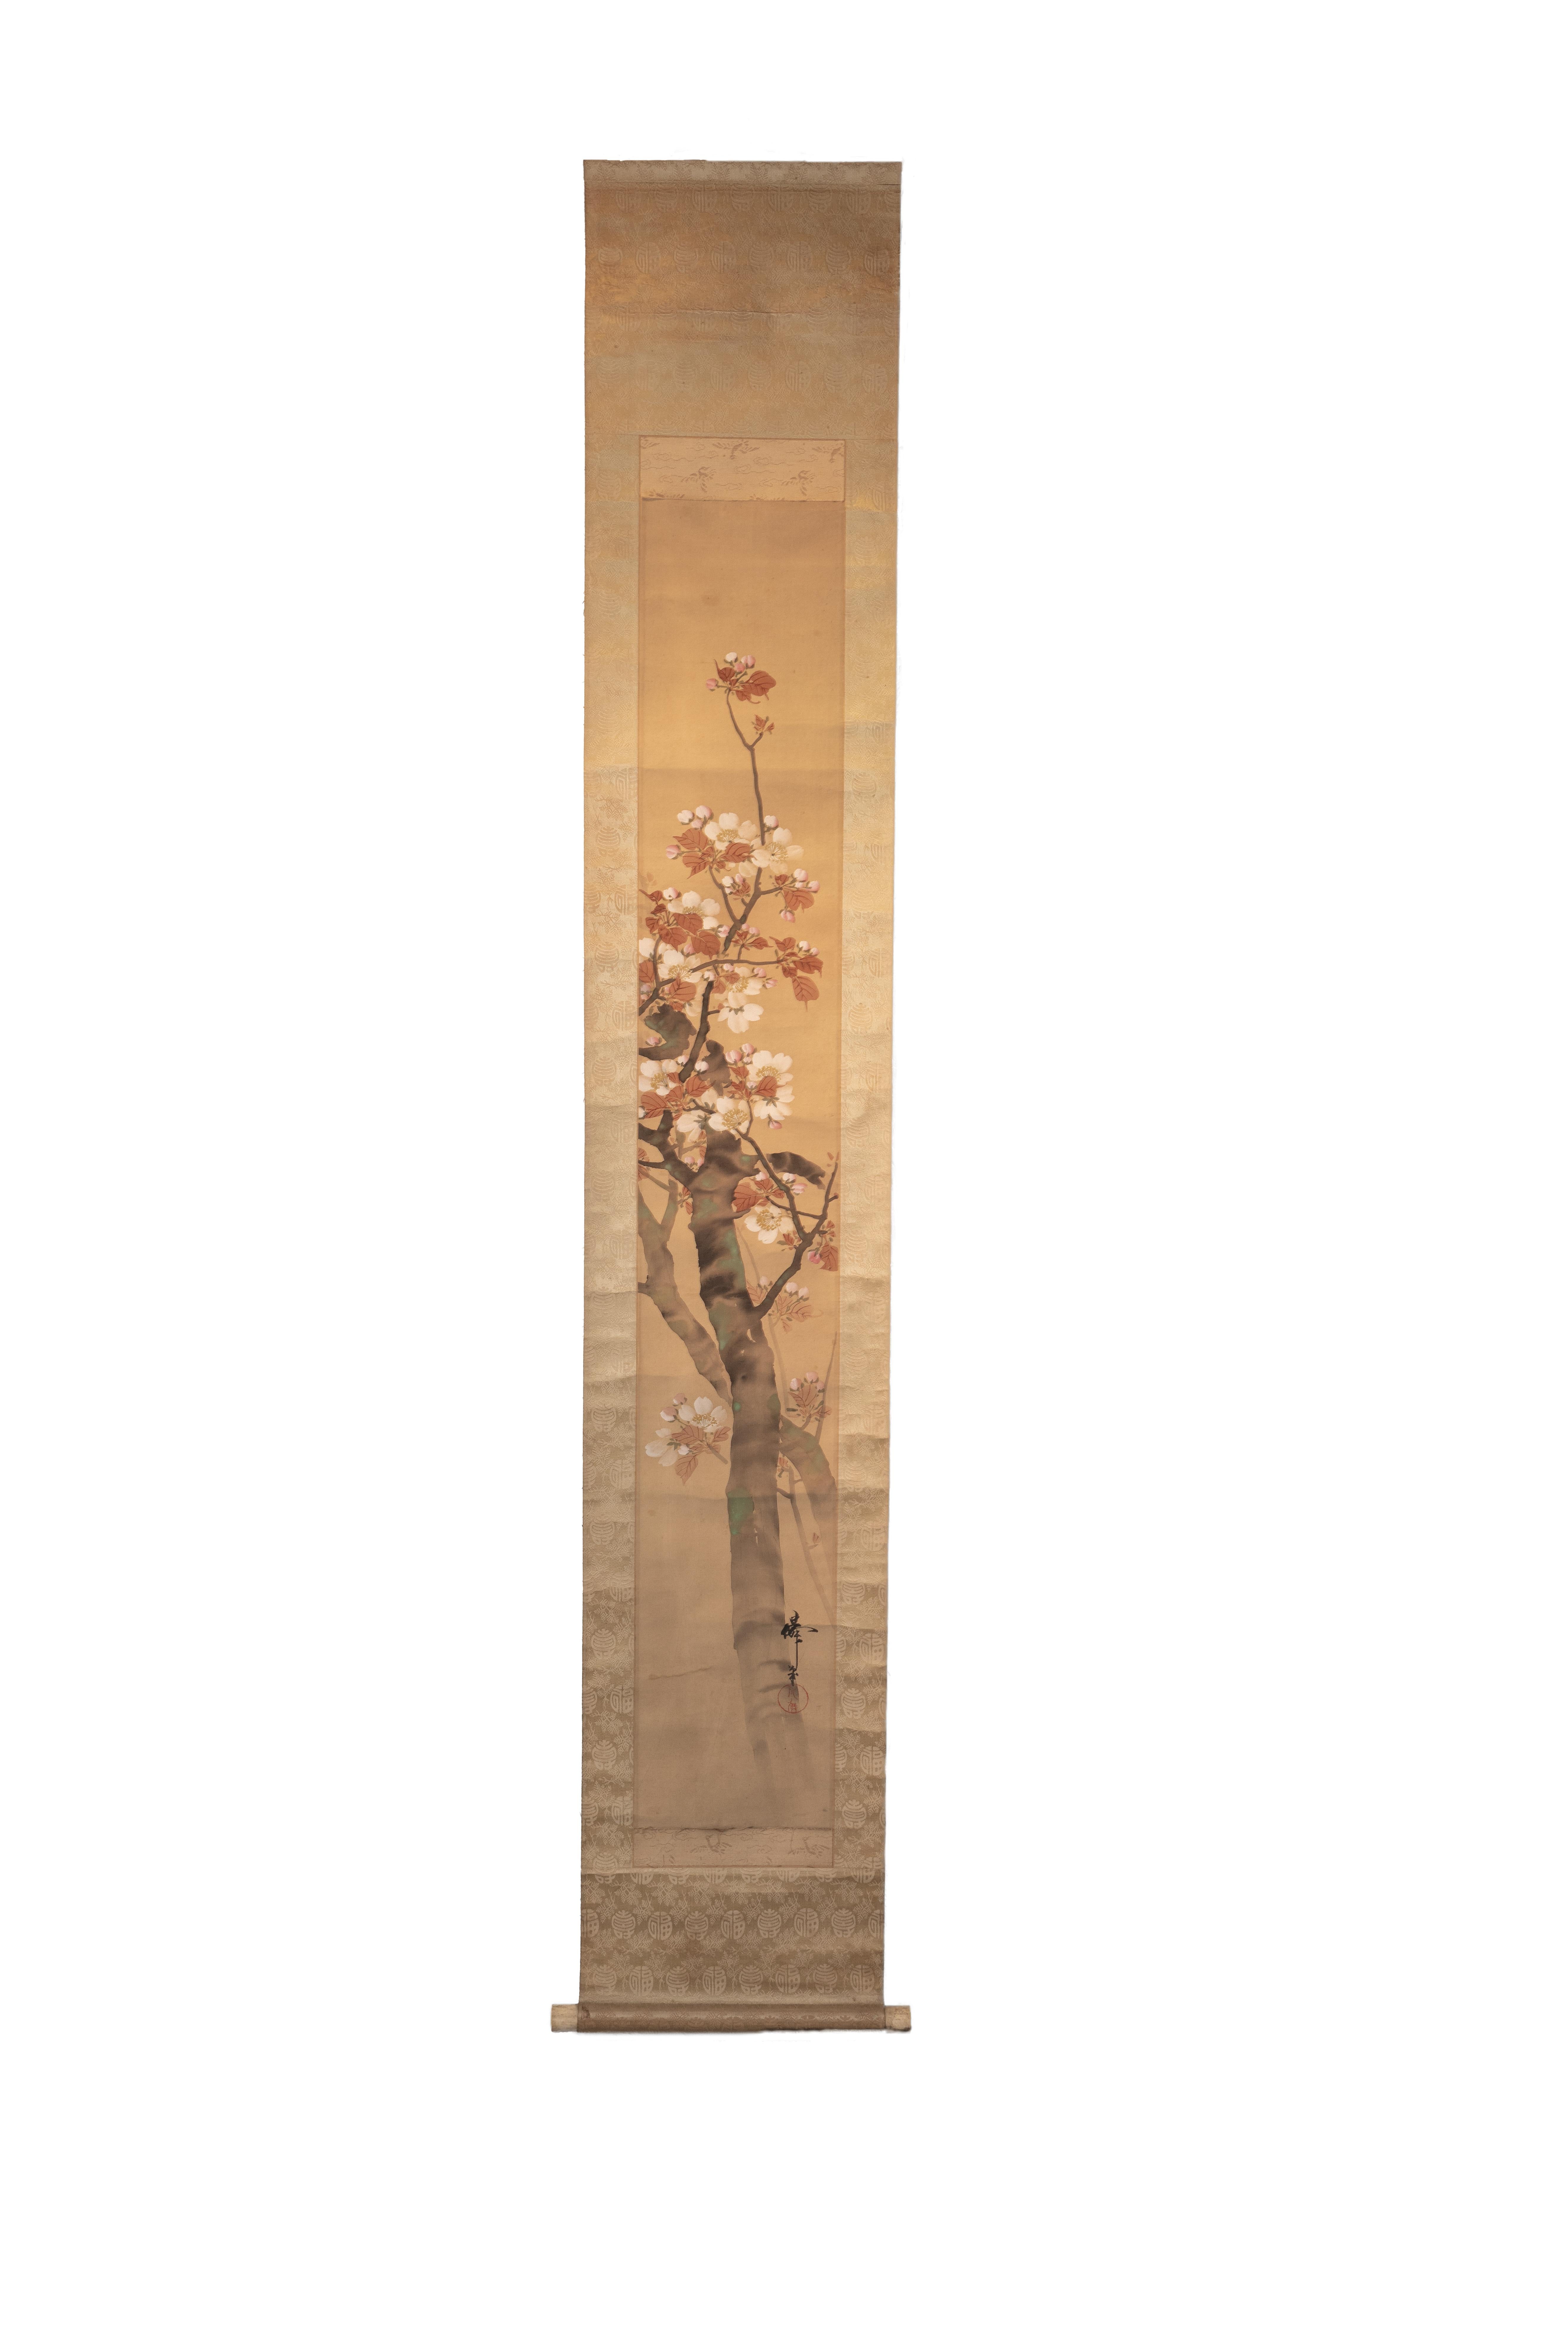 This Antique Japanese Scroll is a depiction of a dogwood tree. Painted in a traditional Japanese style with watercolor, the brush strokes are somewhat opaque and loosely applied. The trunk of the dogwood tree emerges from the bottom, right hand